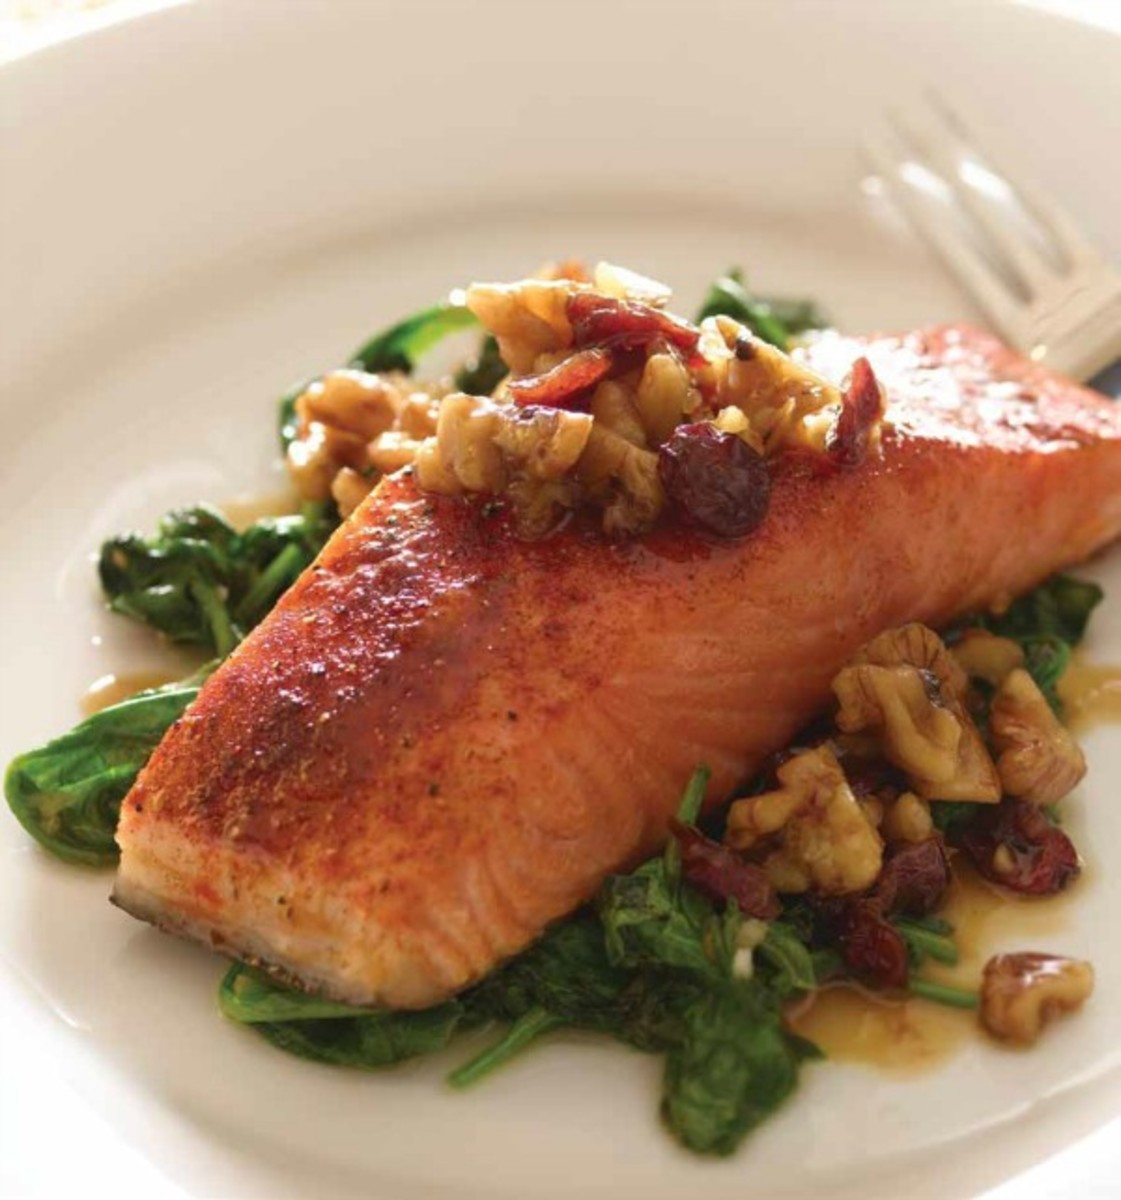 cranberry walnut salmon on a bed of spinach (99)